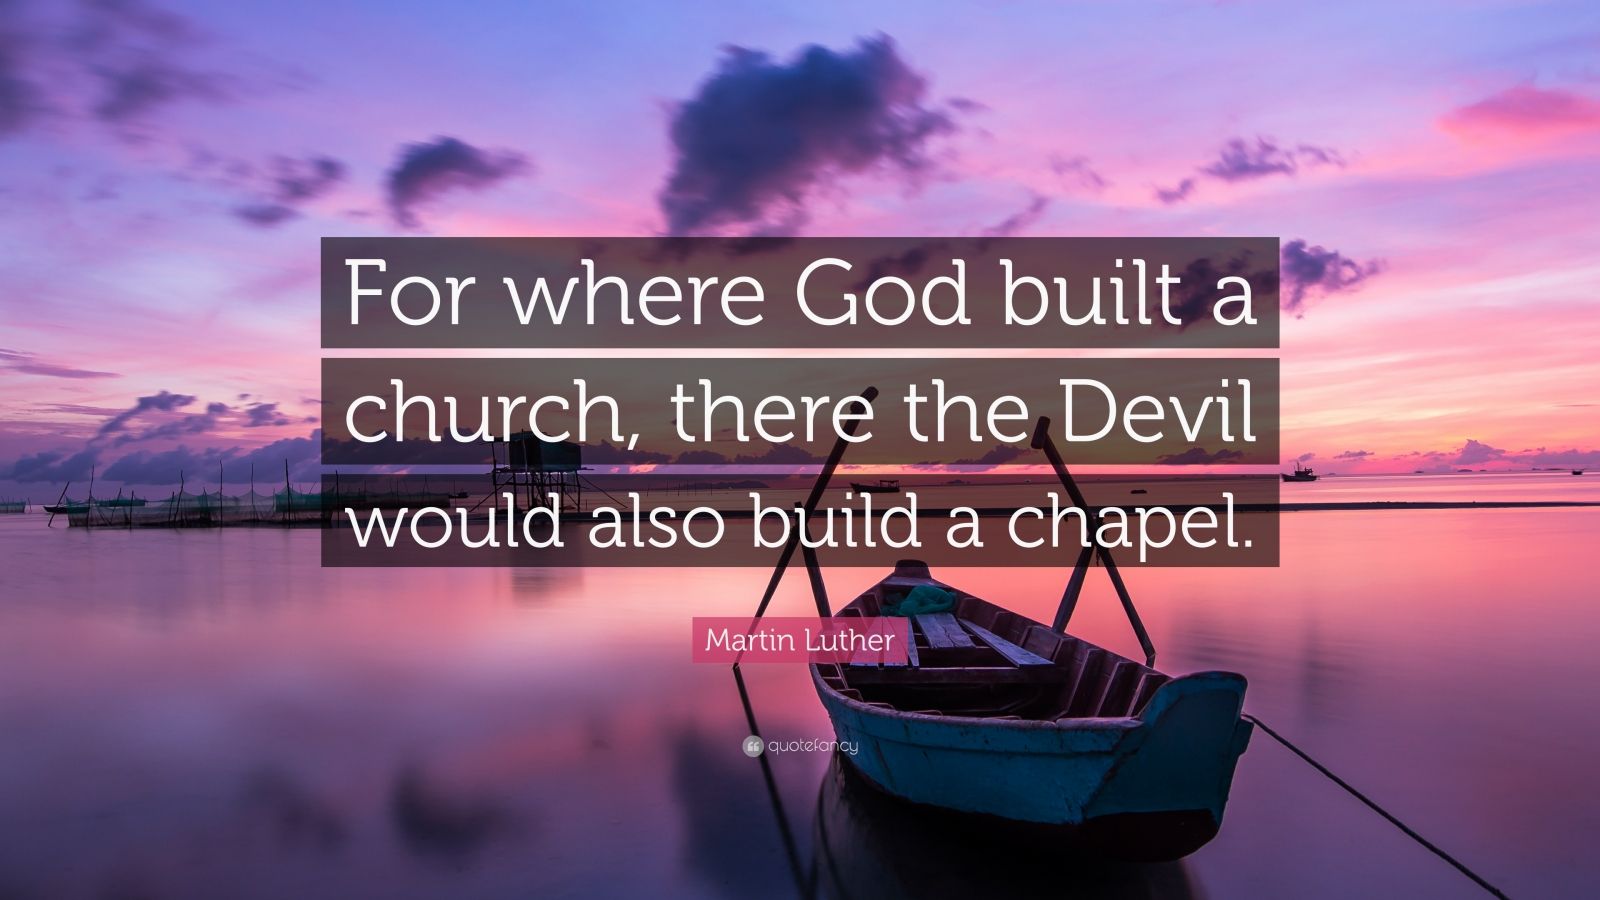 Martin Luther Quote: “For where God built a church, there the Devil ...